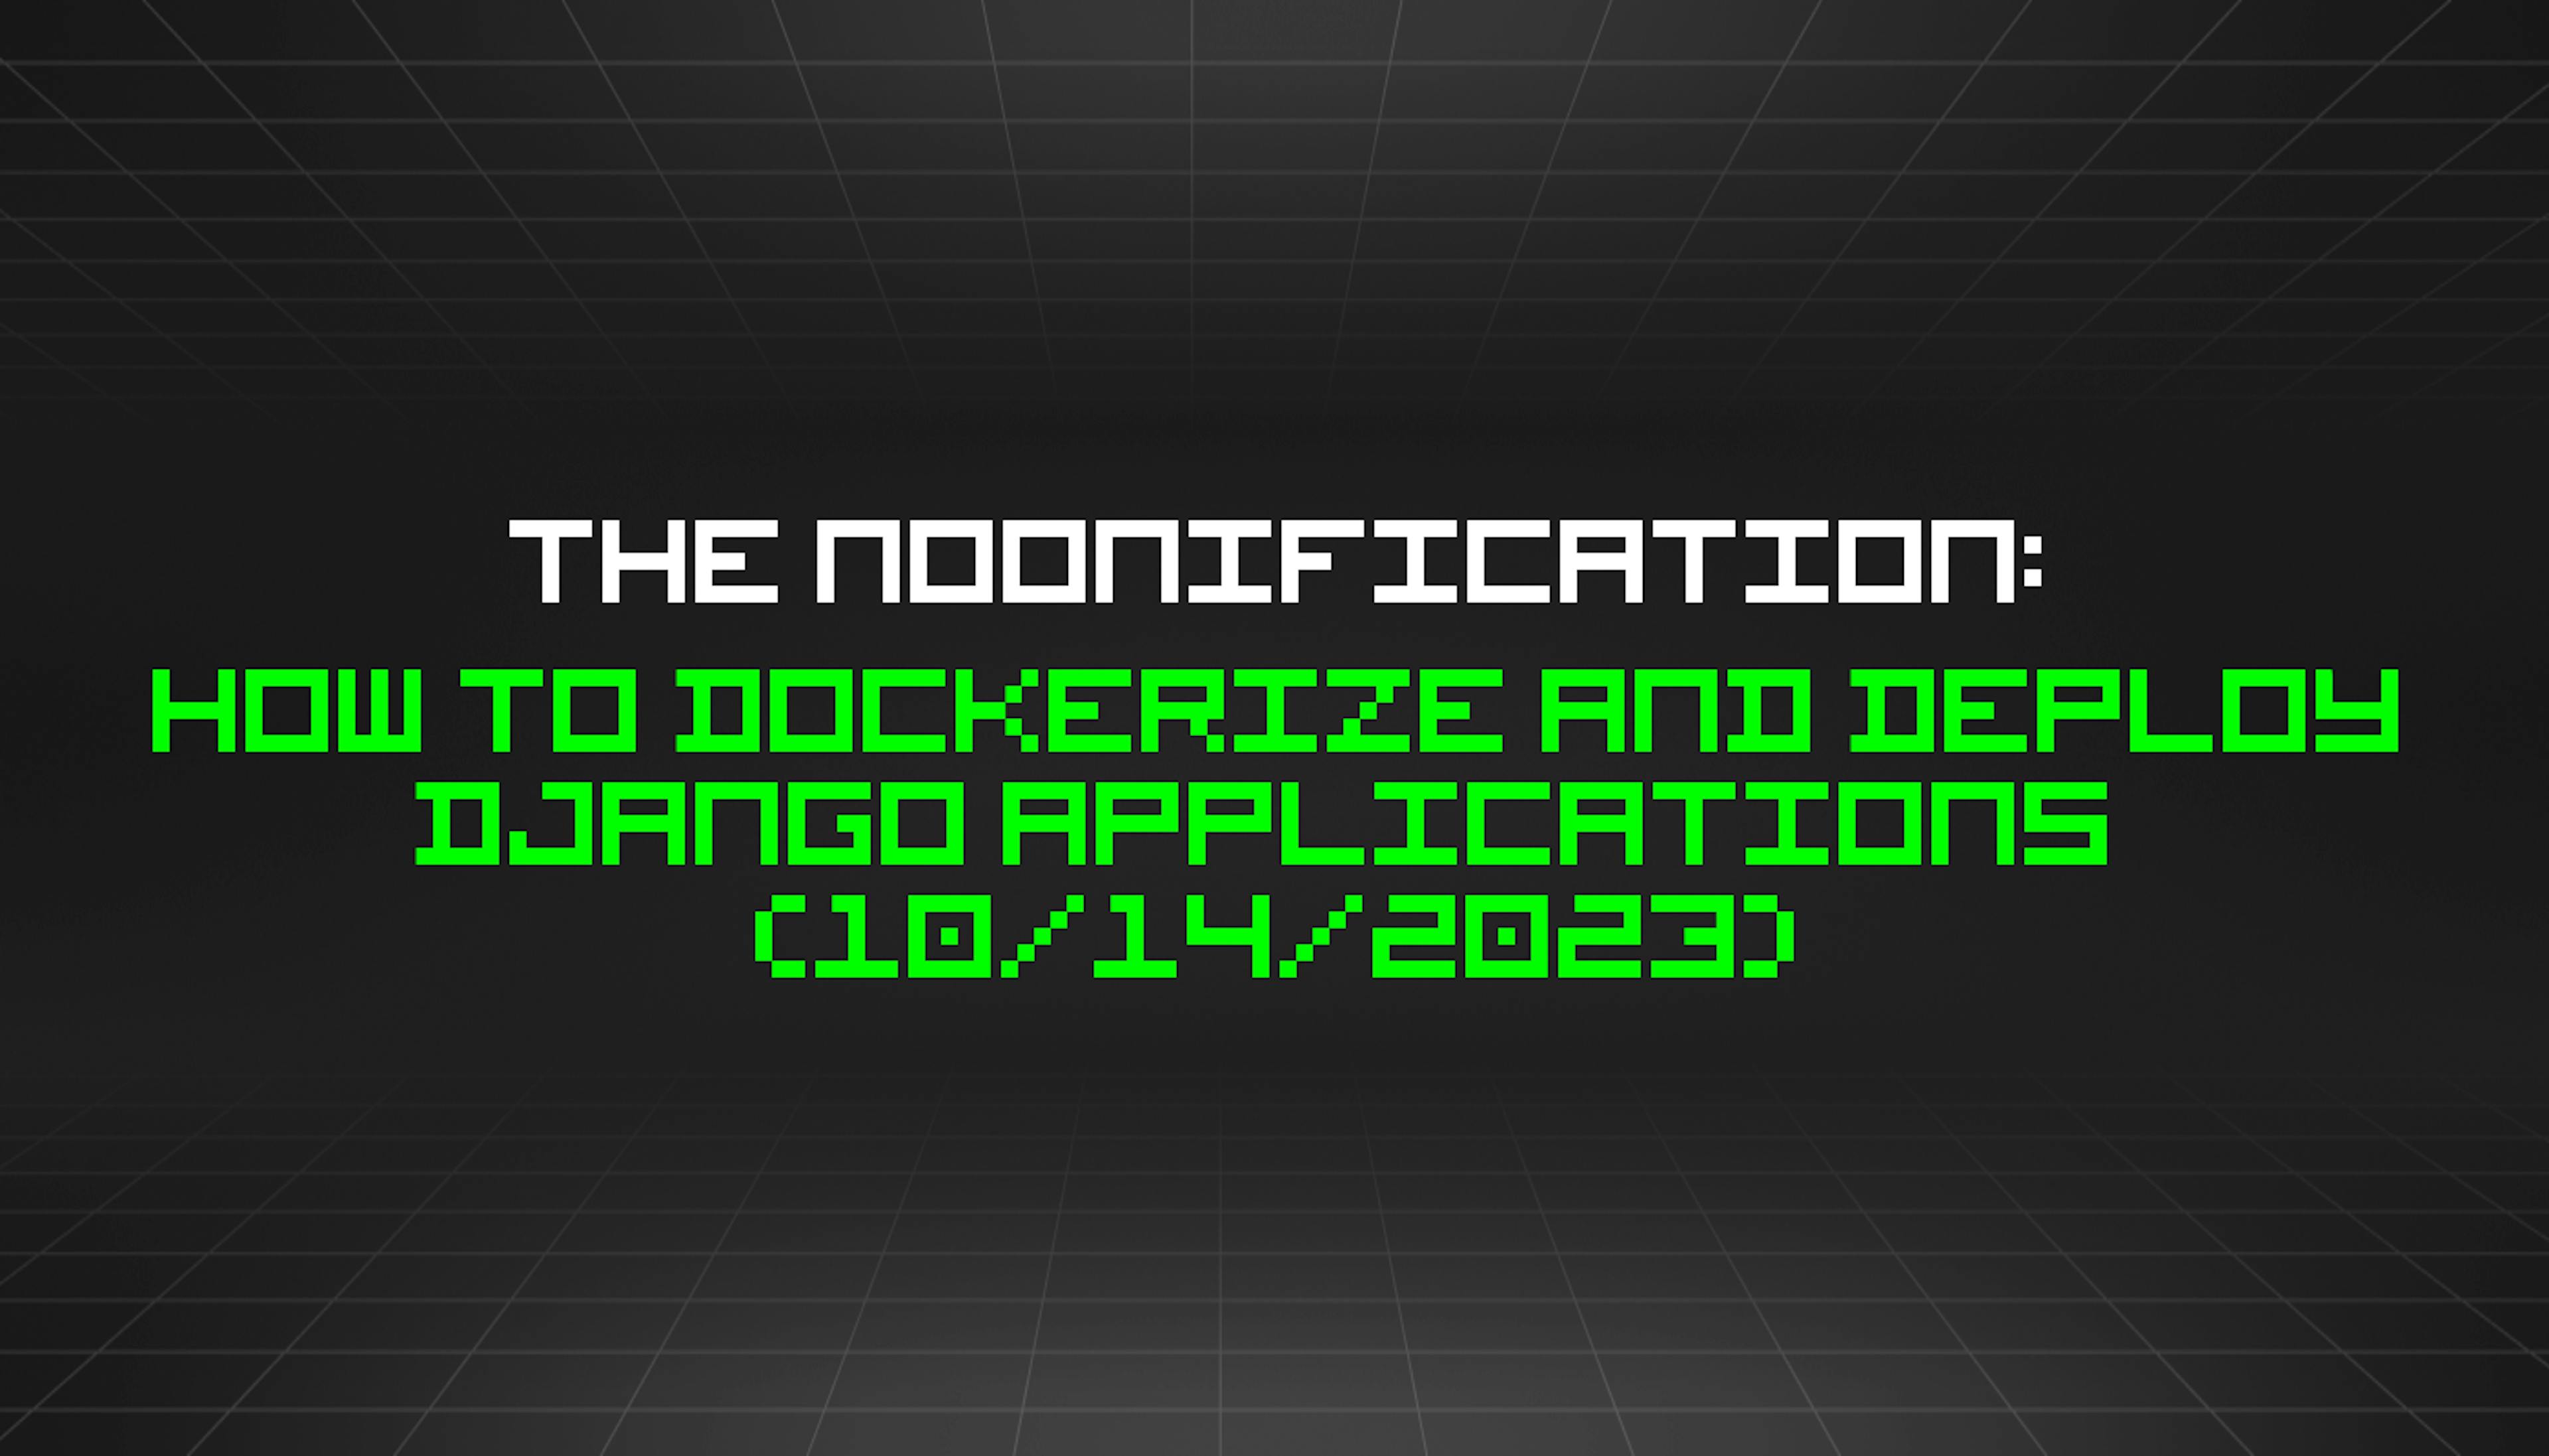 featured image - The Noonification: How to Dockerize And Deploy Django Applications  (10/14/2023)